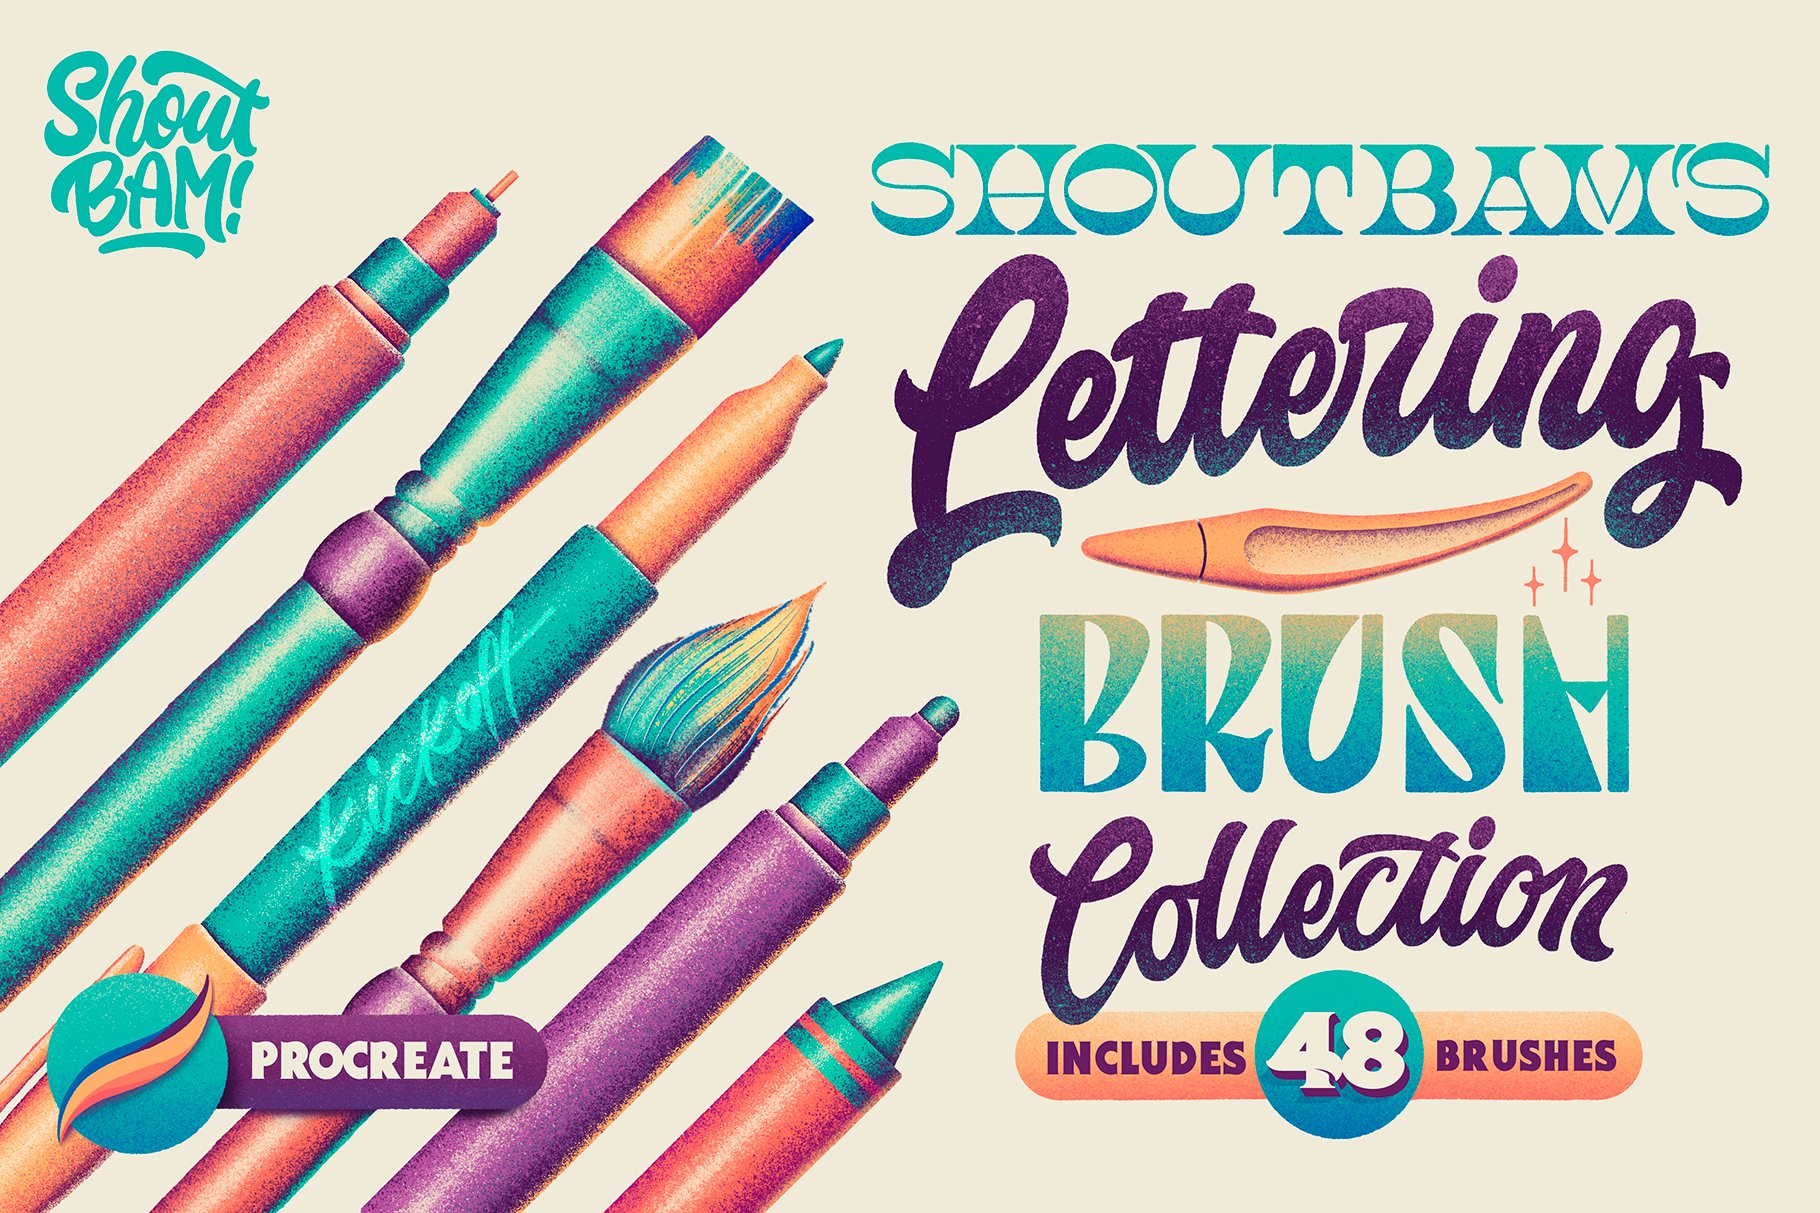 Shoutbam Lettering Brush Collection